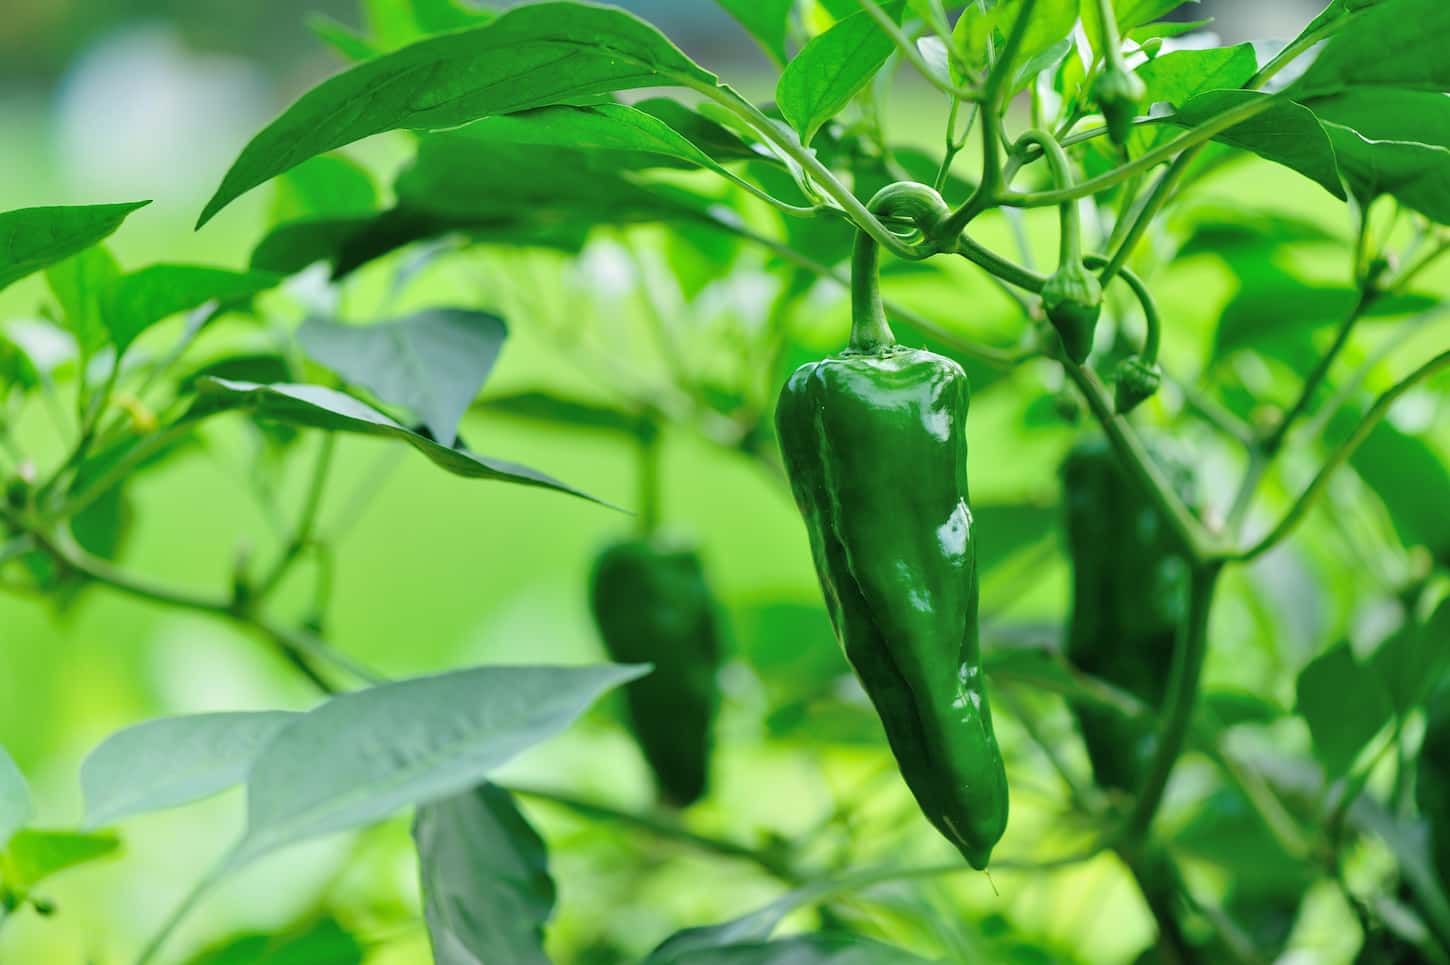 An image of green pepper plants in a vegetable garden on a sunny set-up.